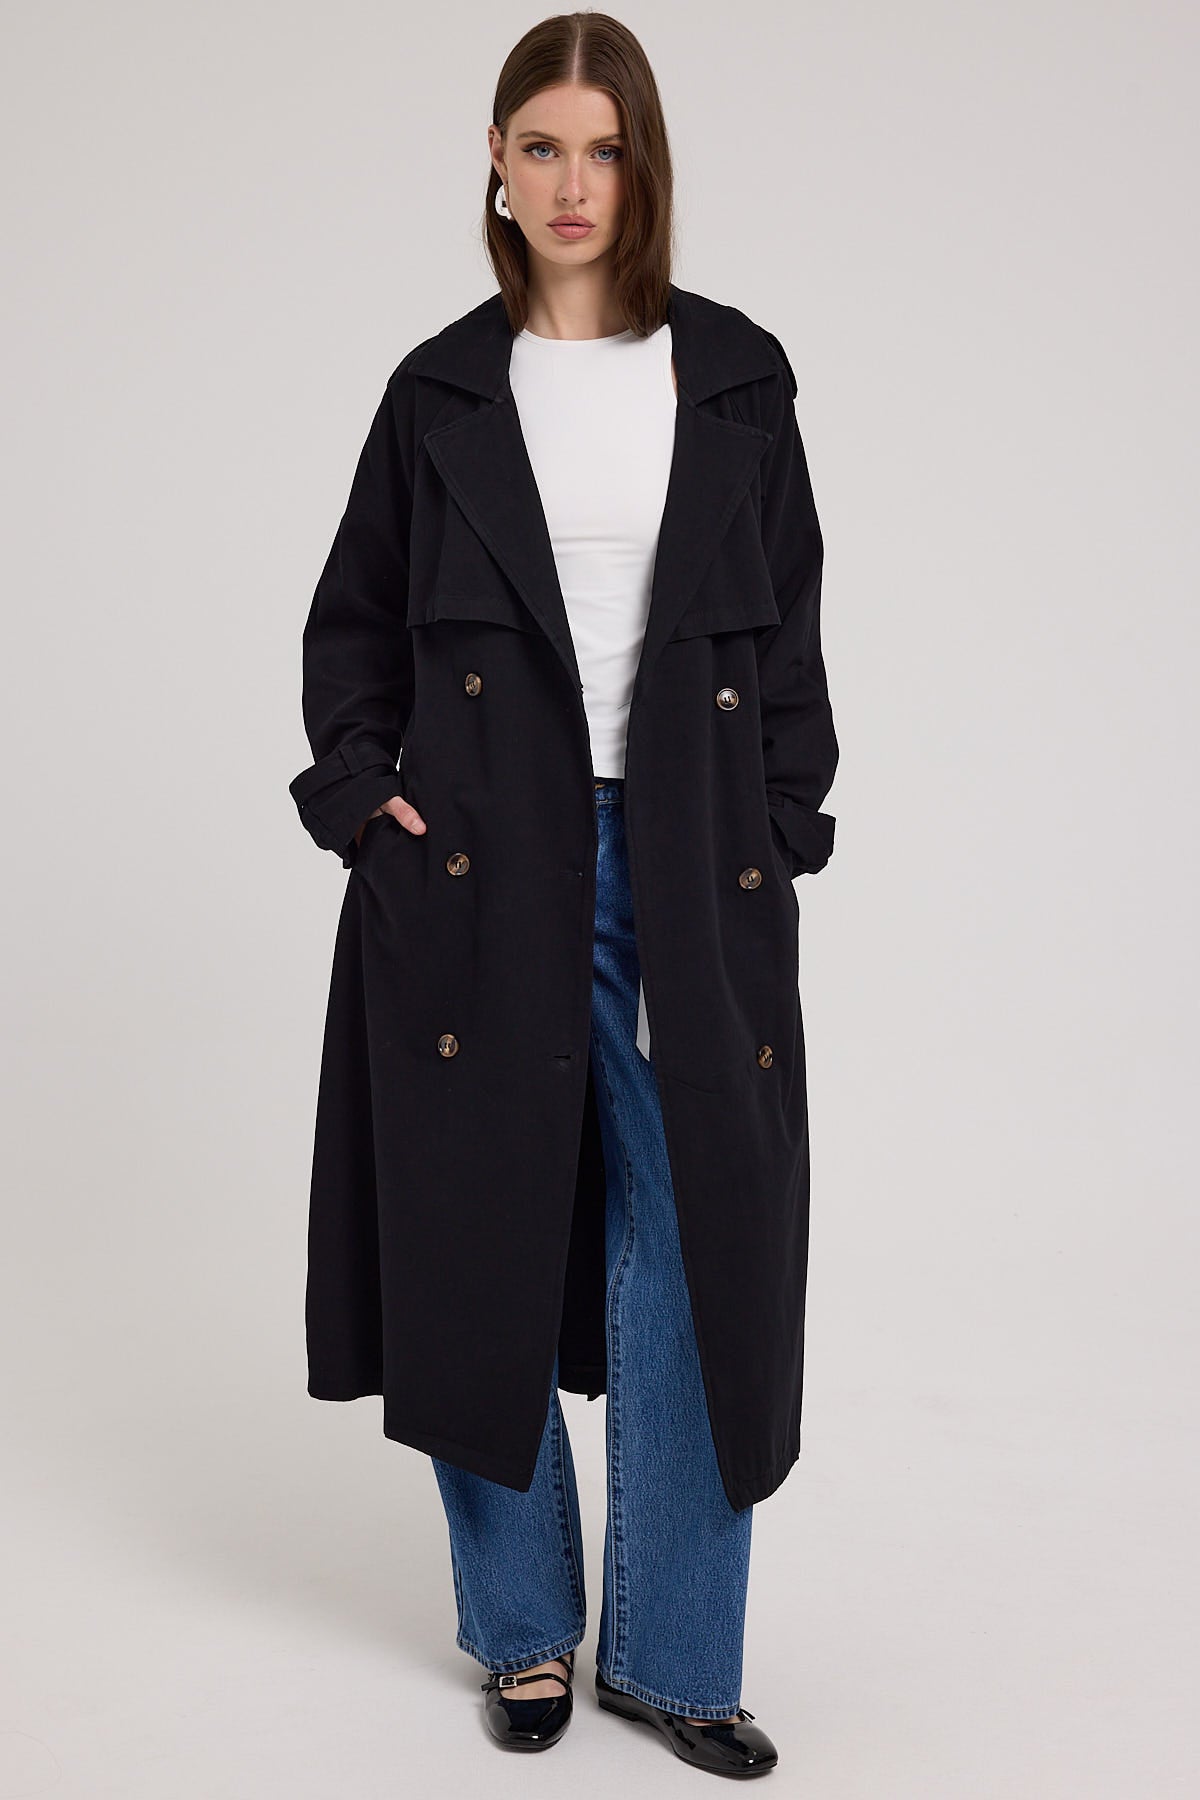 All About Eve Eve Trench Coat Black